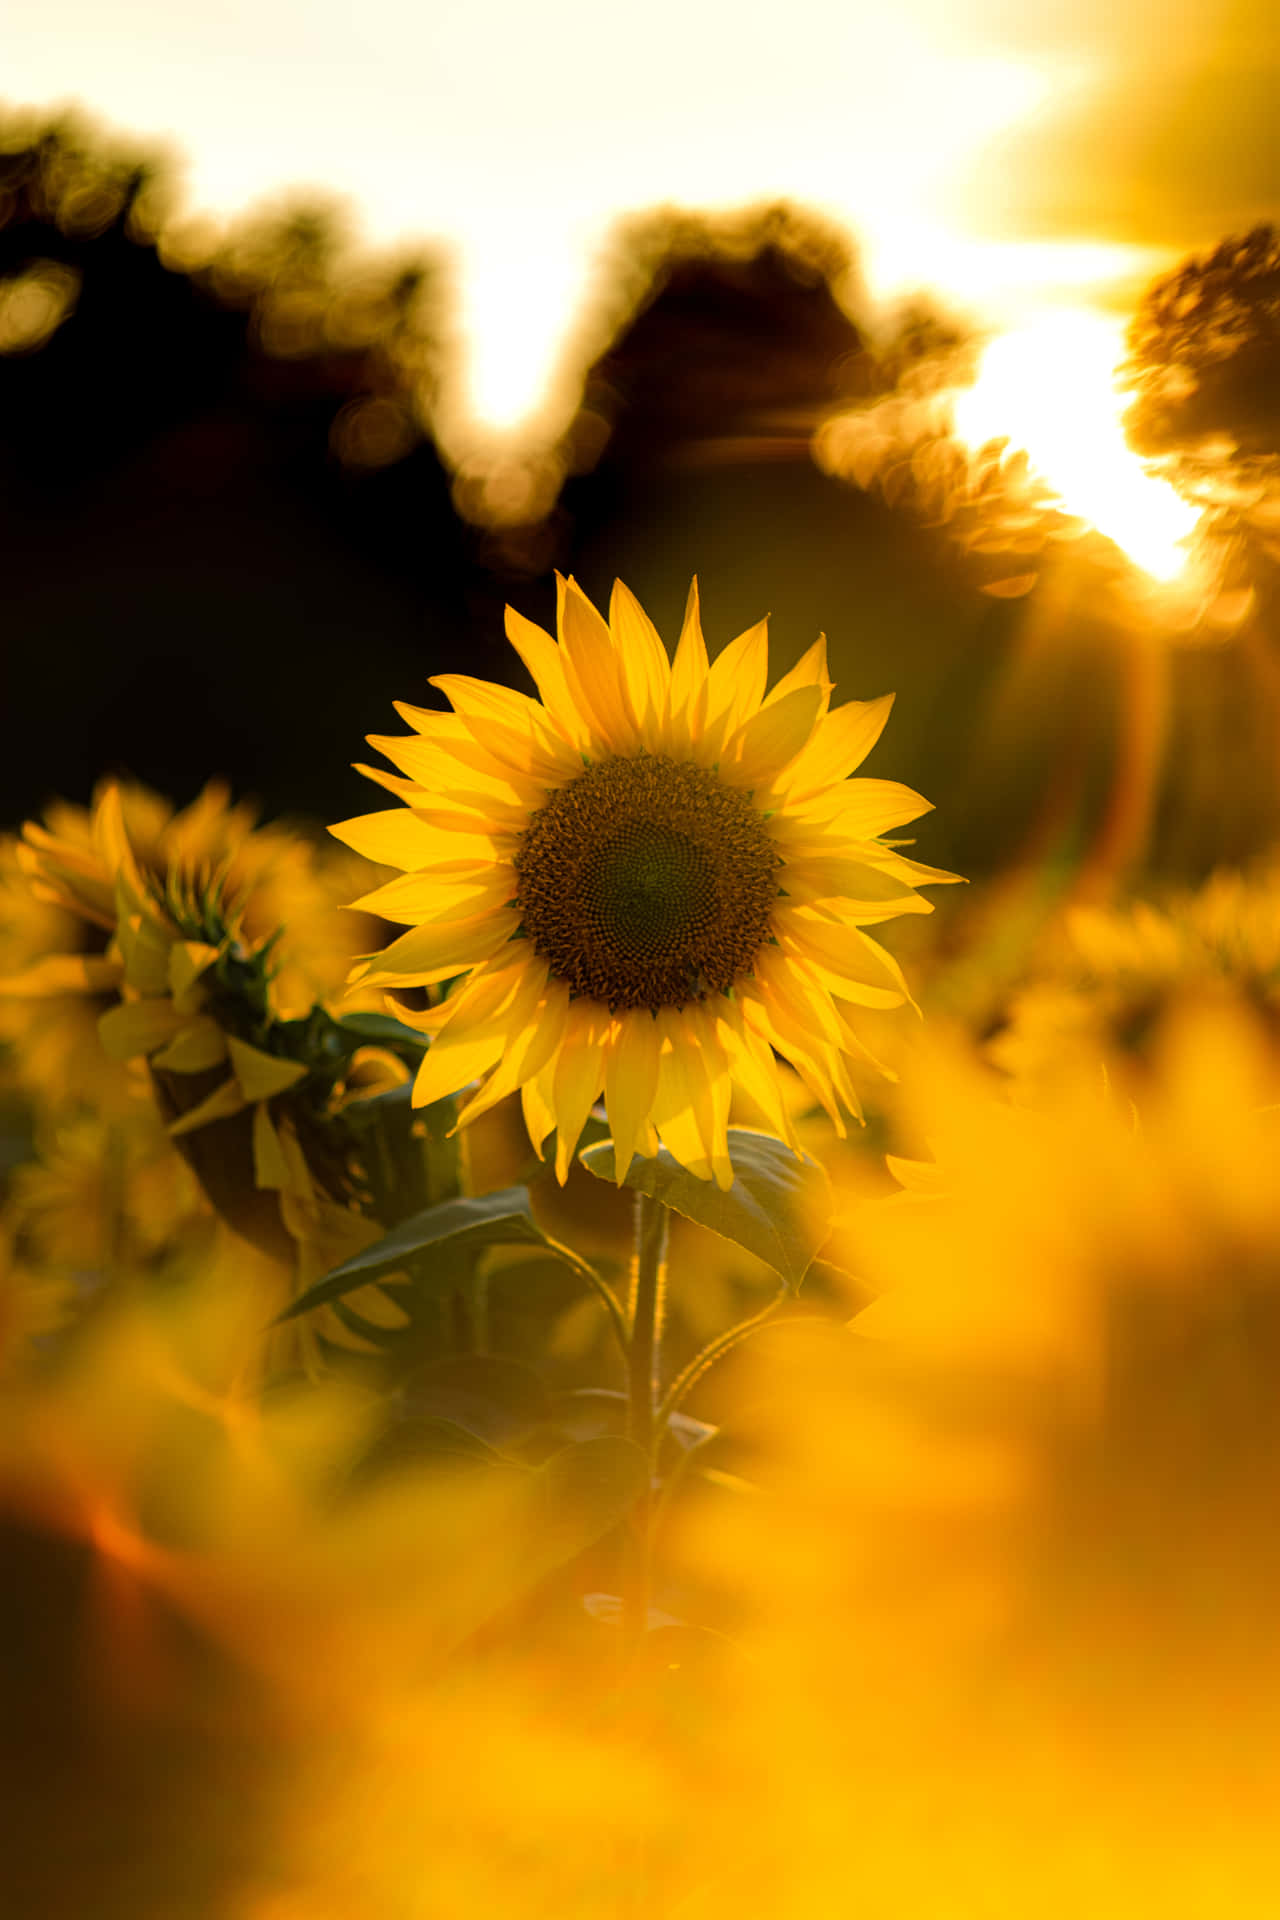 Charge up your day with Sunflower Phone Wallpaper